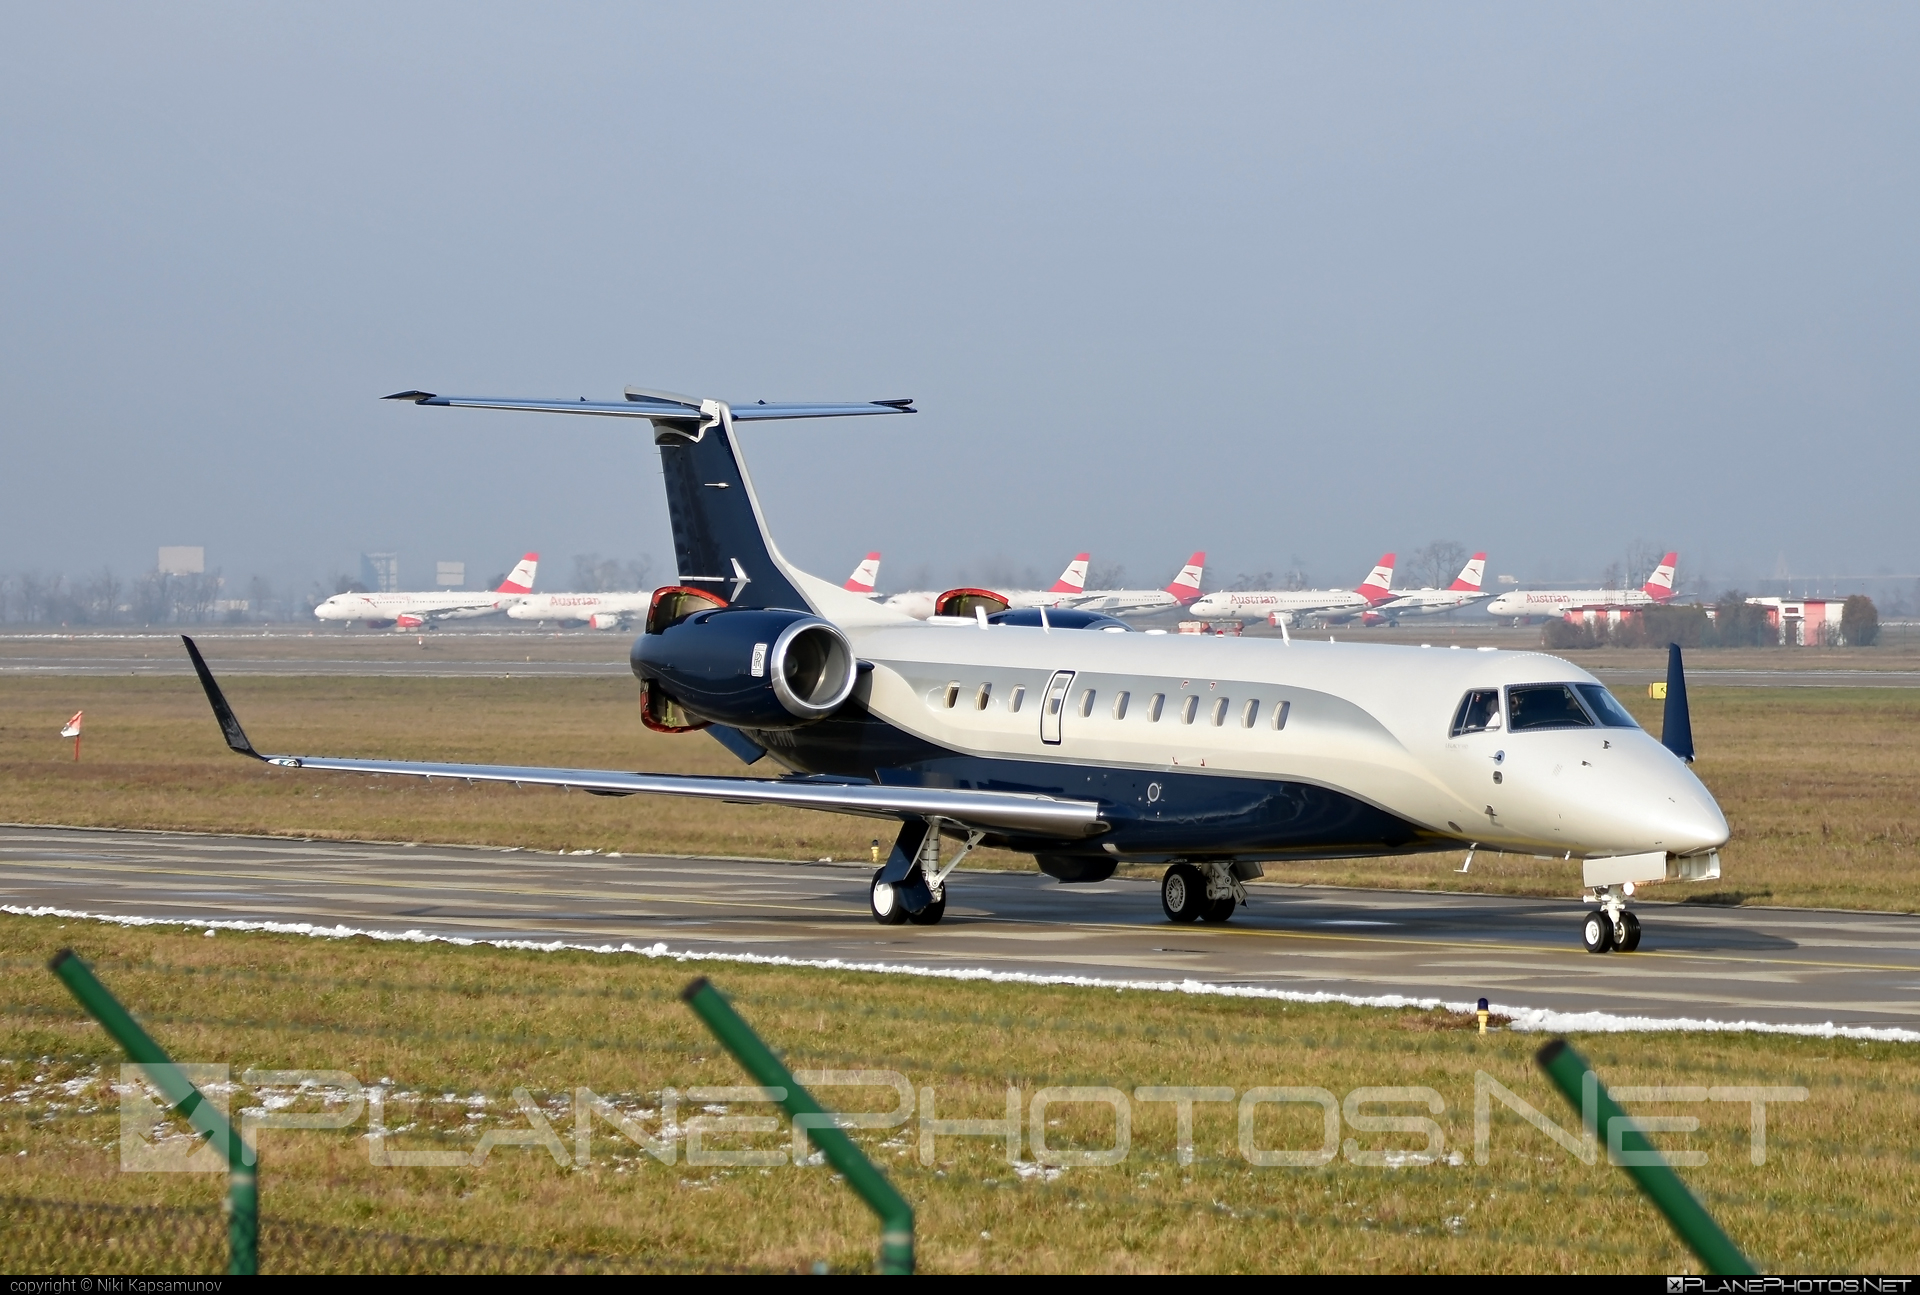 Embraer ERJ-135BJ Legacy 600 - OK-OWN operated by ABS Jets #embraer #embraer135 #embraerlegacy #erj135 #erj135bj #legacy600